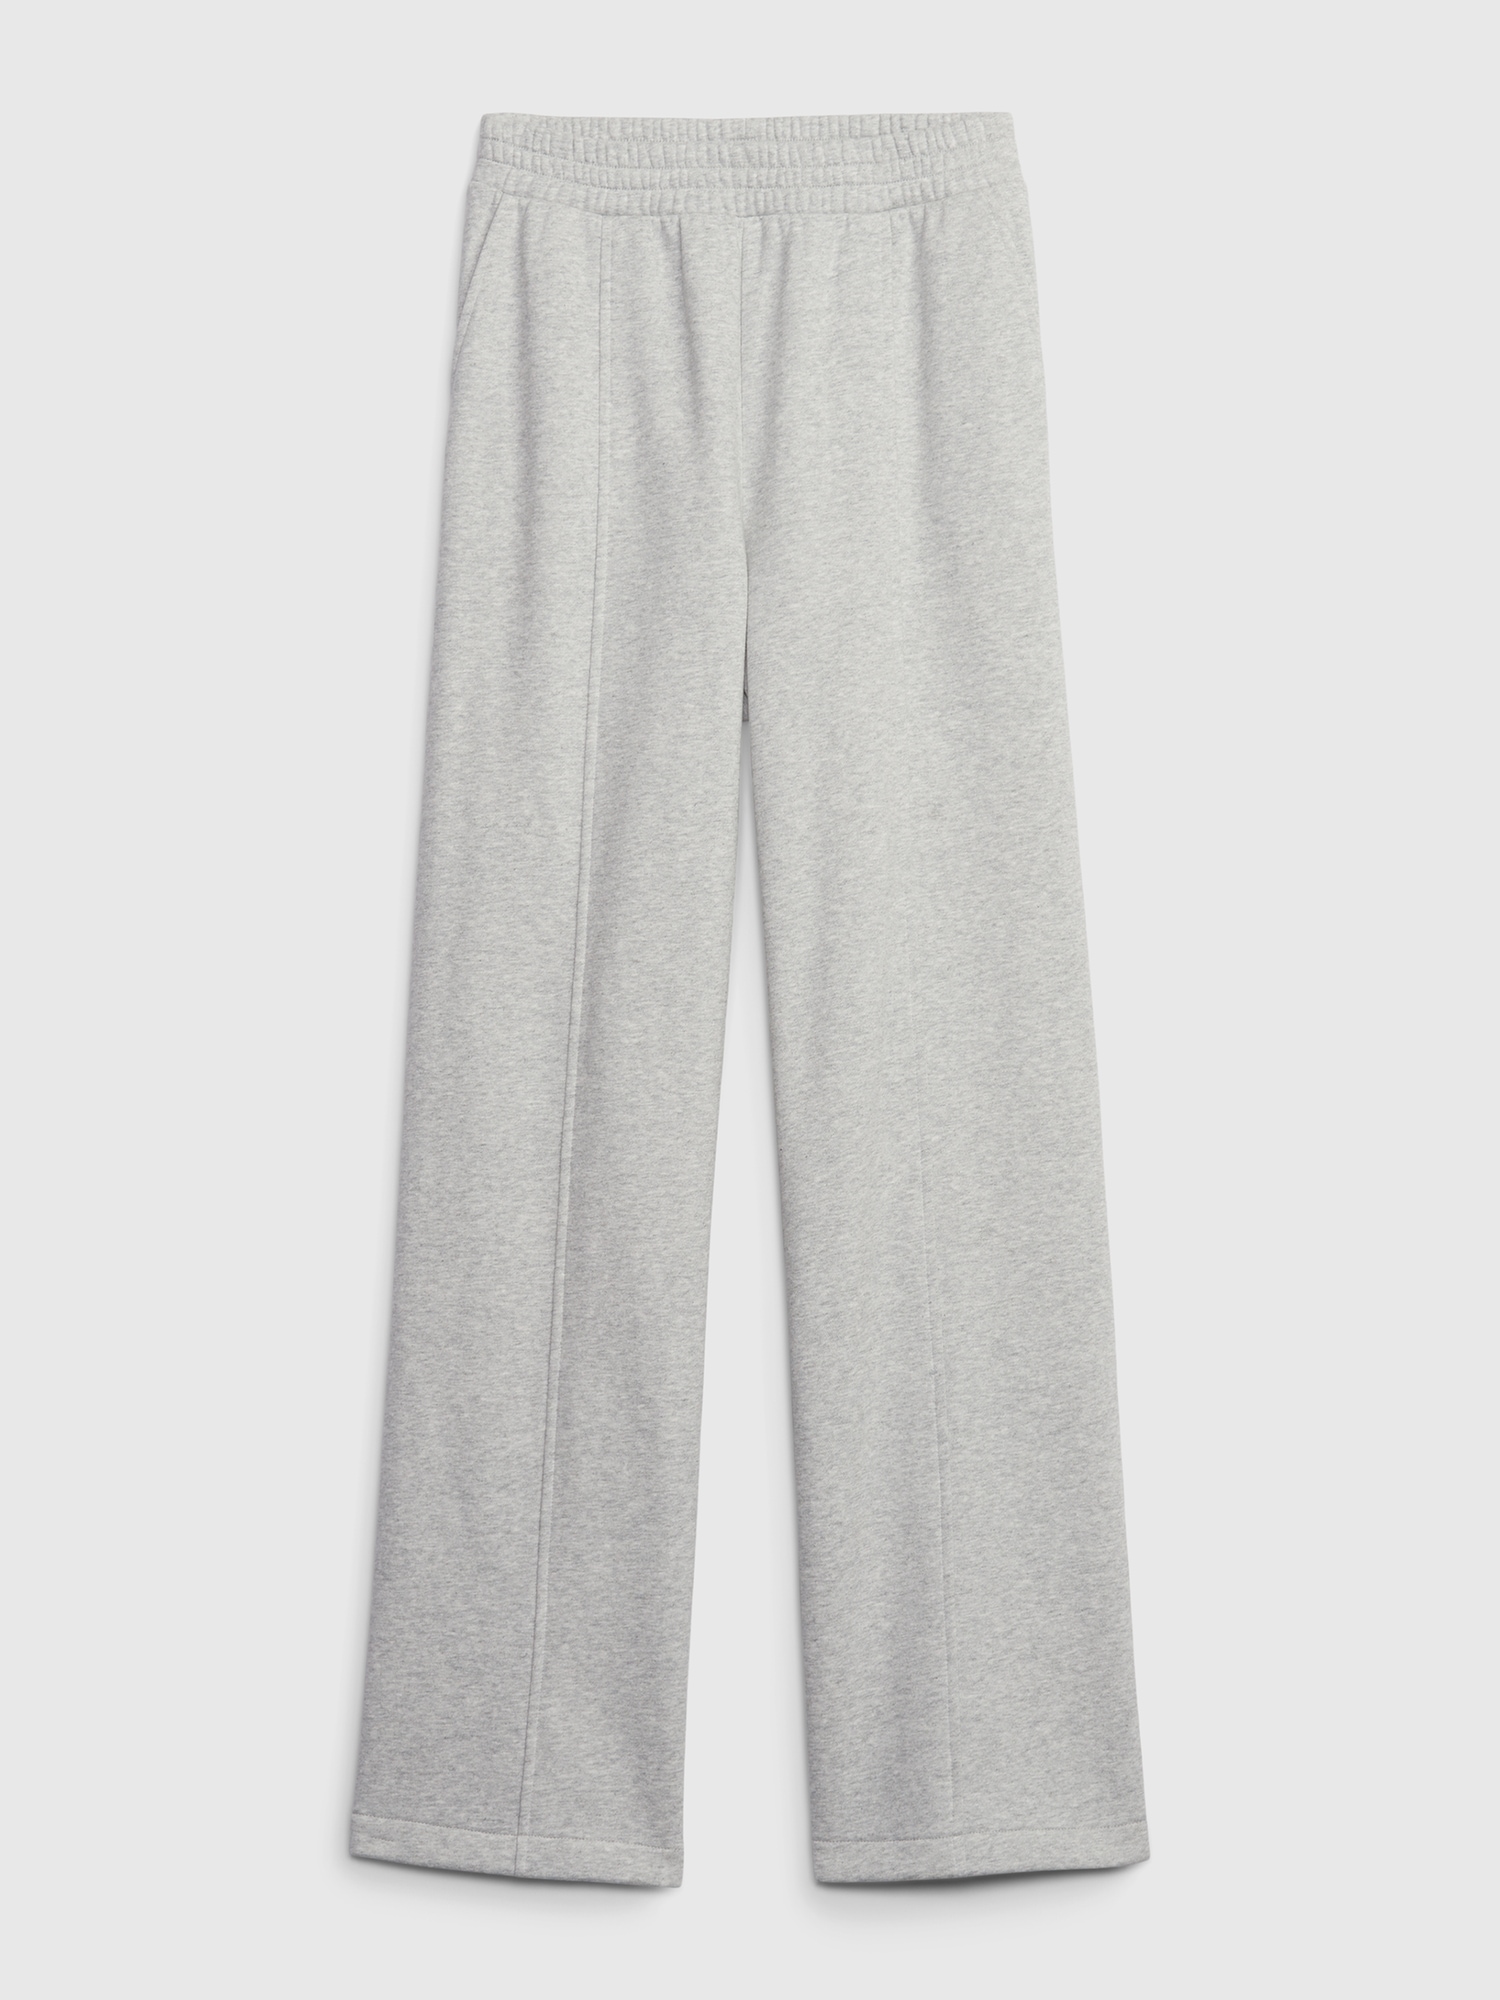 Lounge Sweat Pants Sexy Wide Leg Sweatpants for Womens Athletic